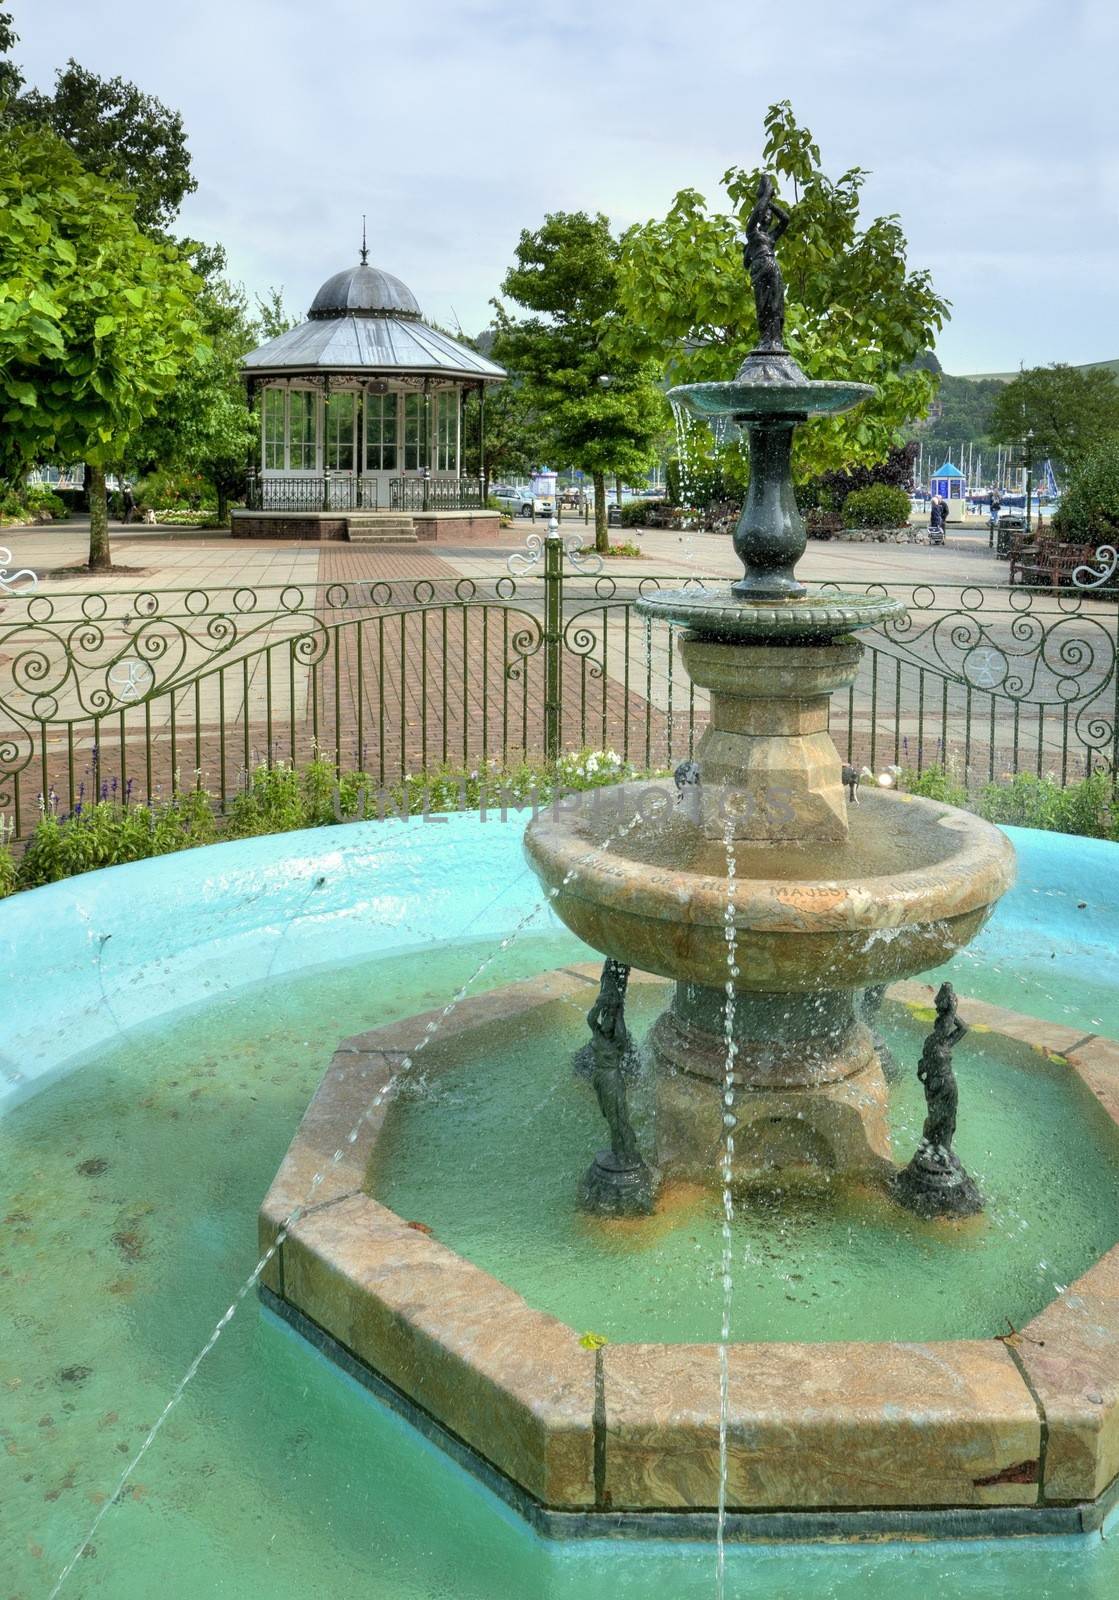 The fountain and bandstand at Dartmouth Park, Devon, England.